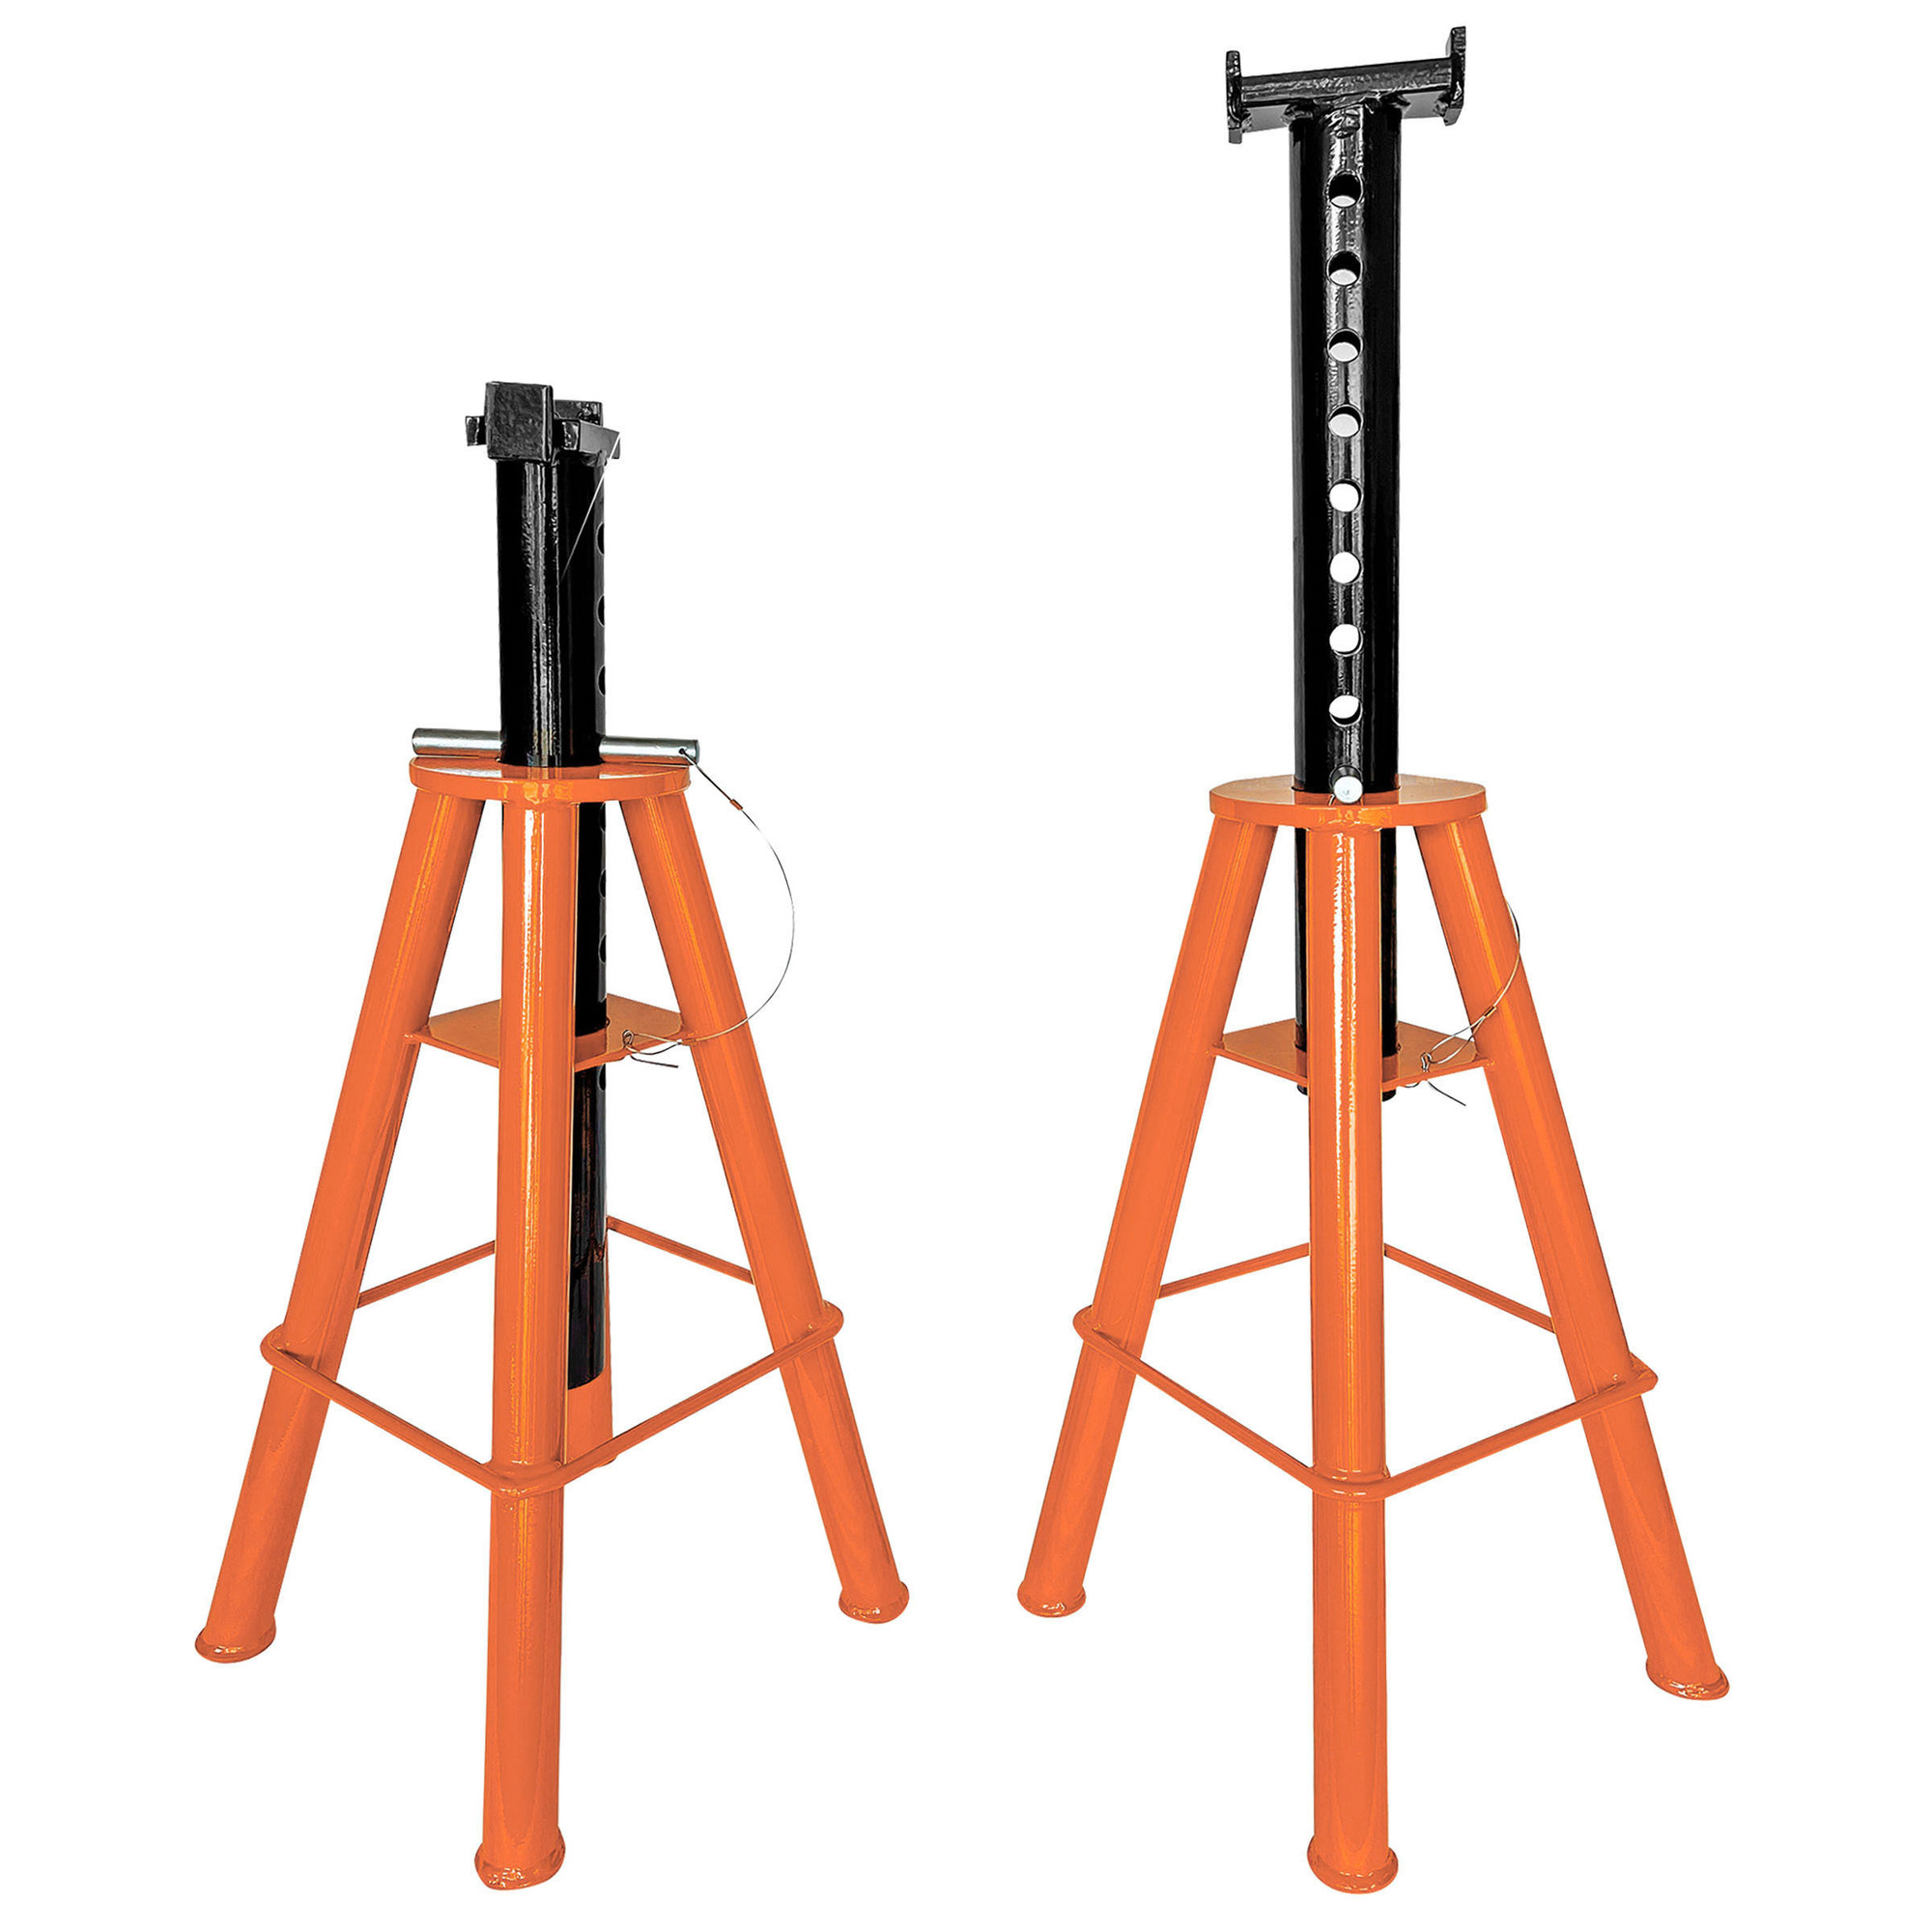 Buffalo Tools, 10 Ton High Height Jack Stand (2pk), Lift Capacity 10 Tons, Max. Lift Height 46.75 in, MInch Lift Height 28.75 in, Model JS10HSET